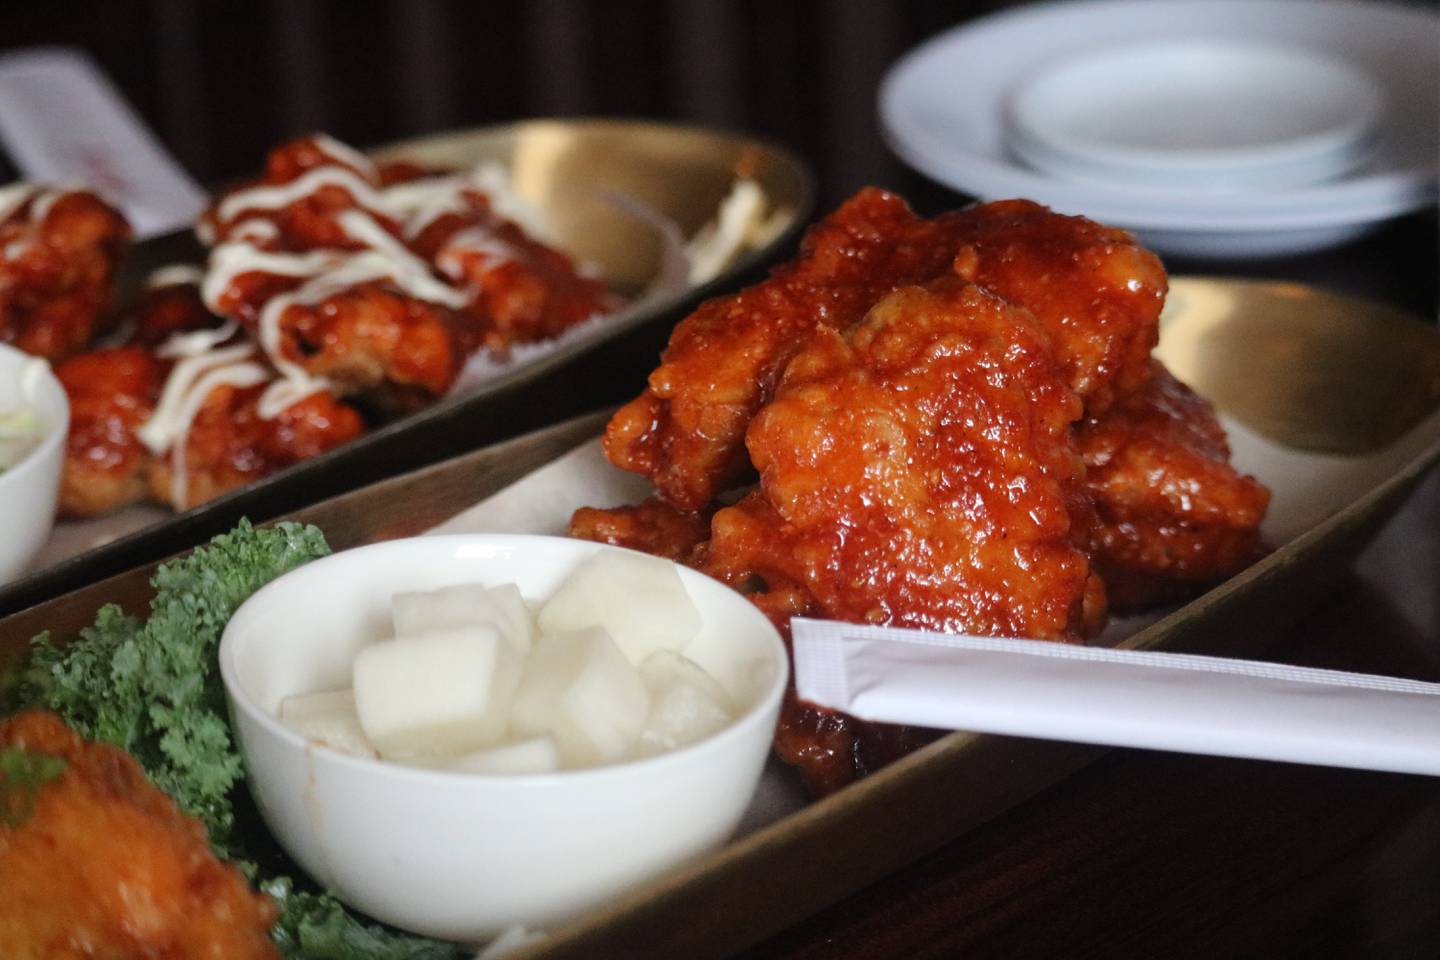 Korean fried chicken from Omi Sushi in DeKalb comes in a variety of flavors, including plain, magic sprinkle, soy garlic, sweet and mild, and supreme or hot. Omi Sushi in DeKalb is pictured March 13, 2023.